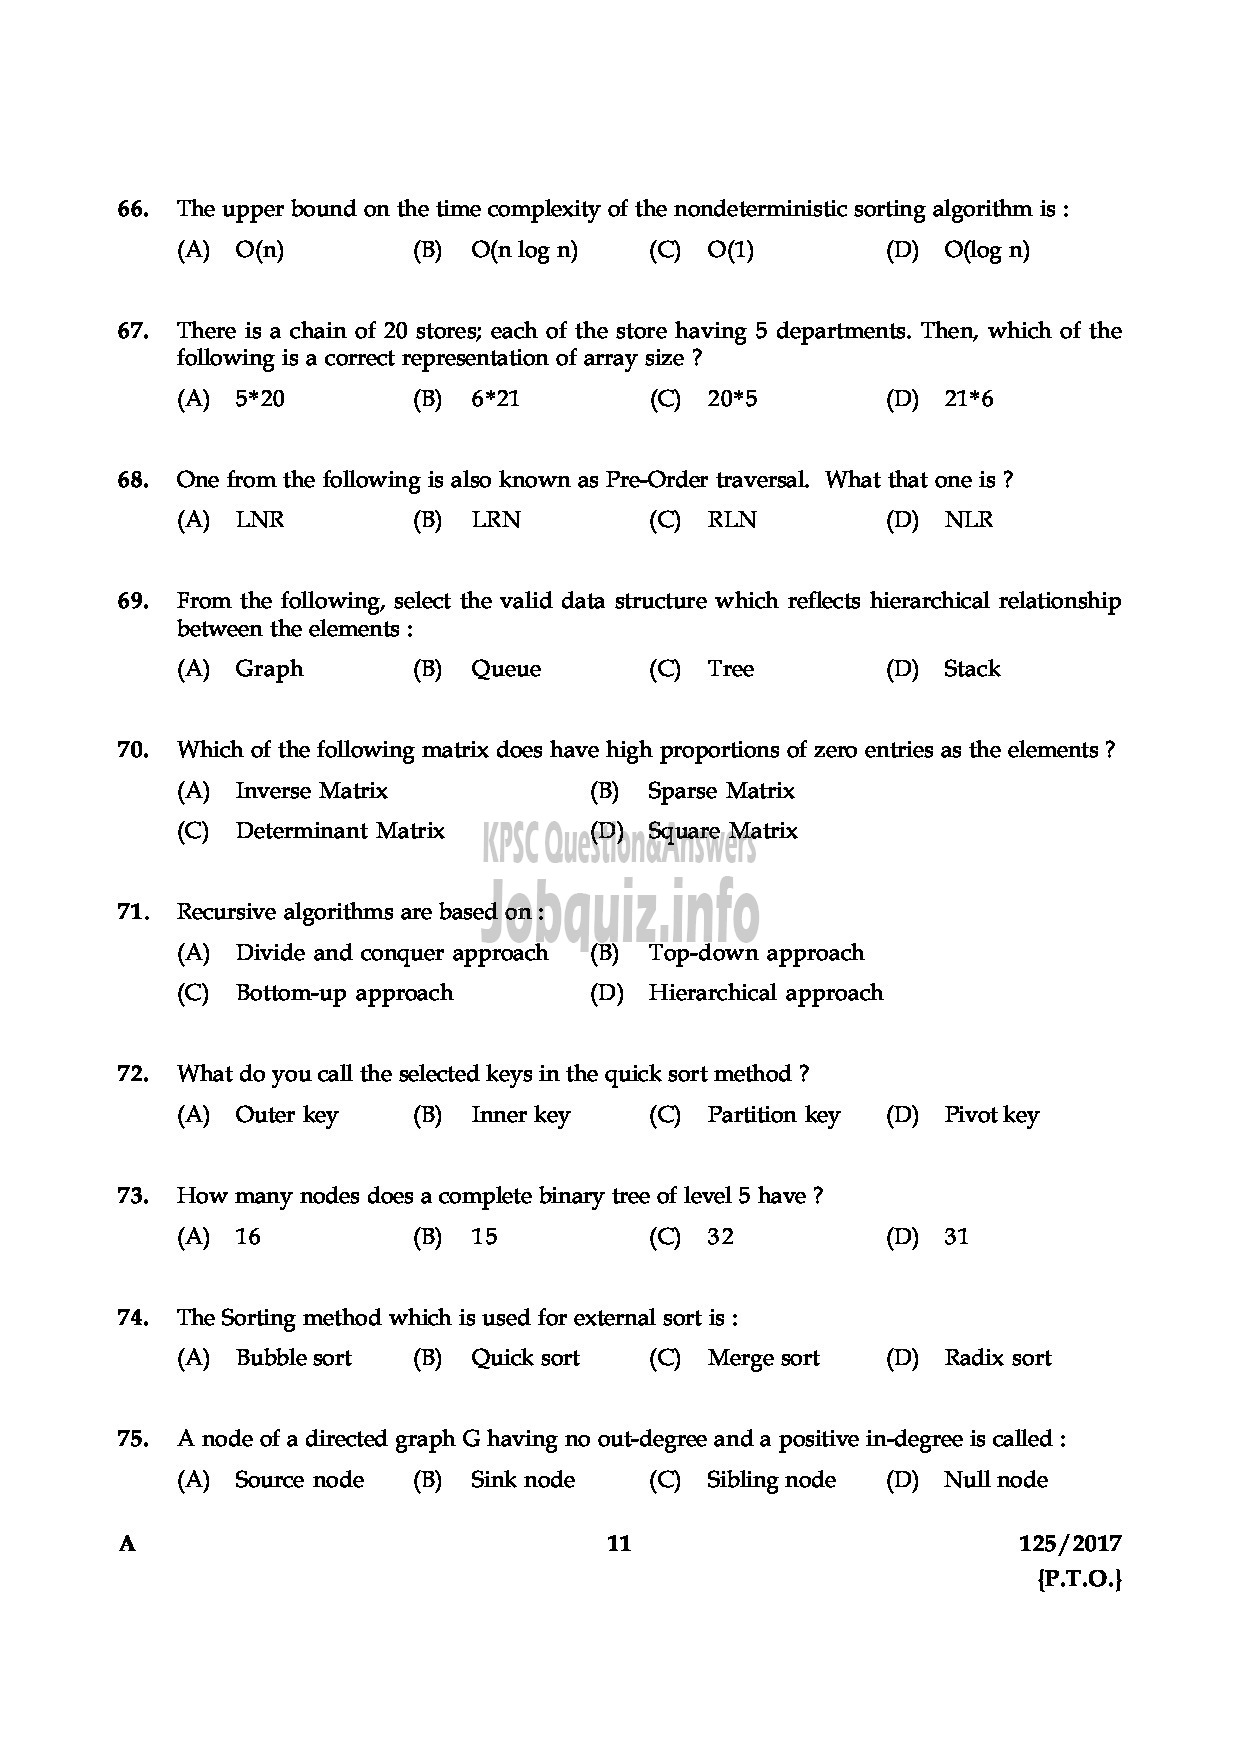 Kerala PSC Question Paper - LECTURER IN COMPUTER APPLICATION COLLEGIATE EDUCATION-11